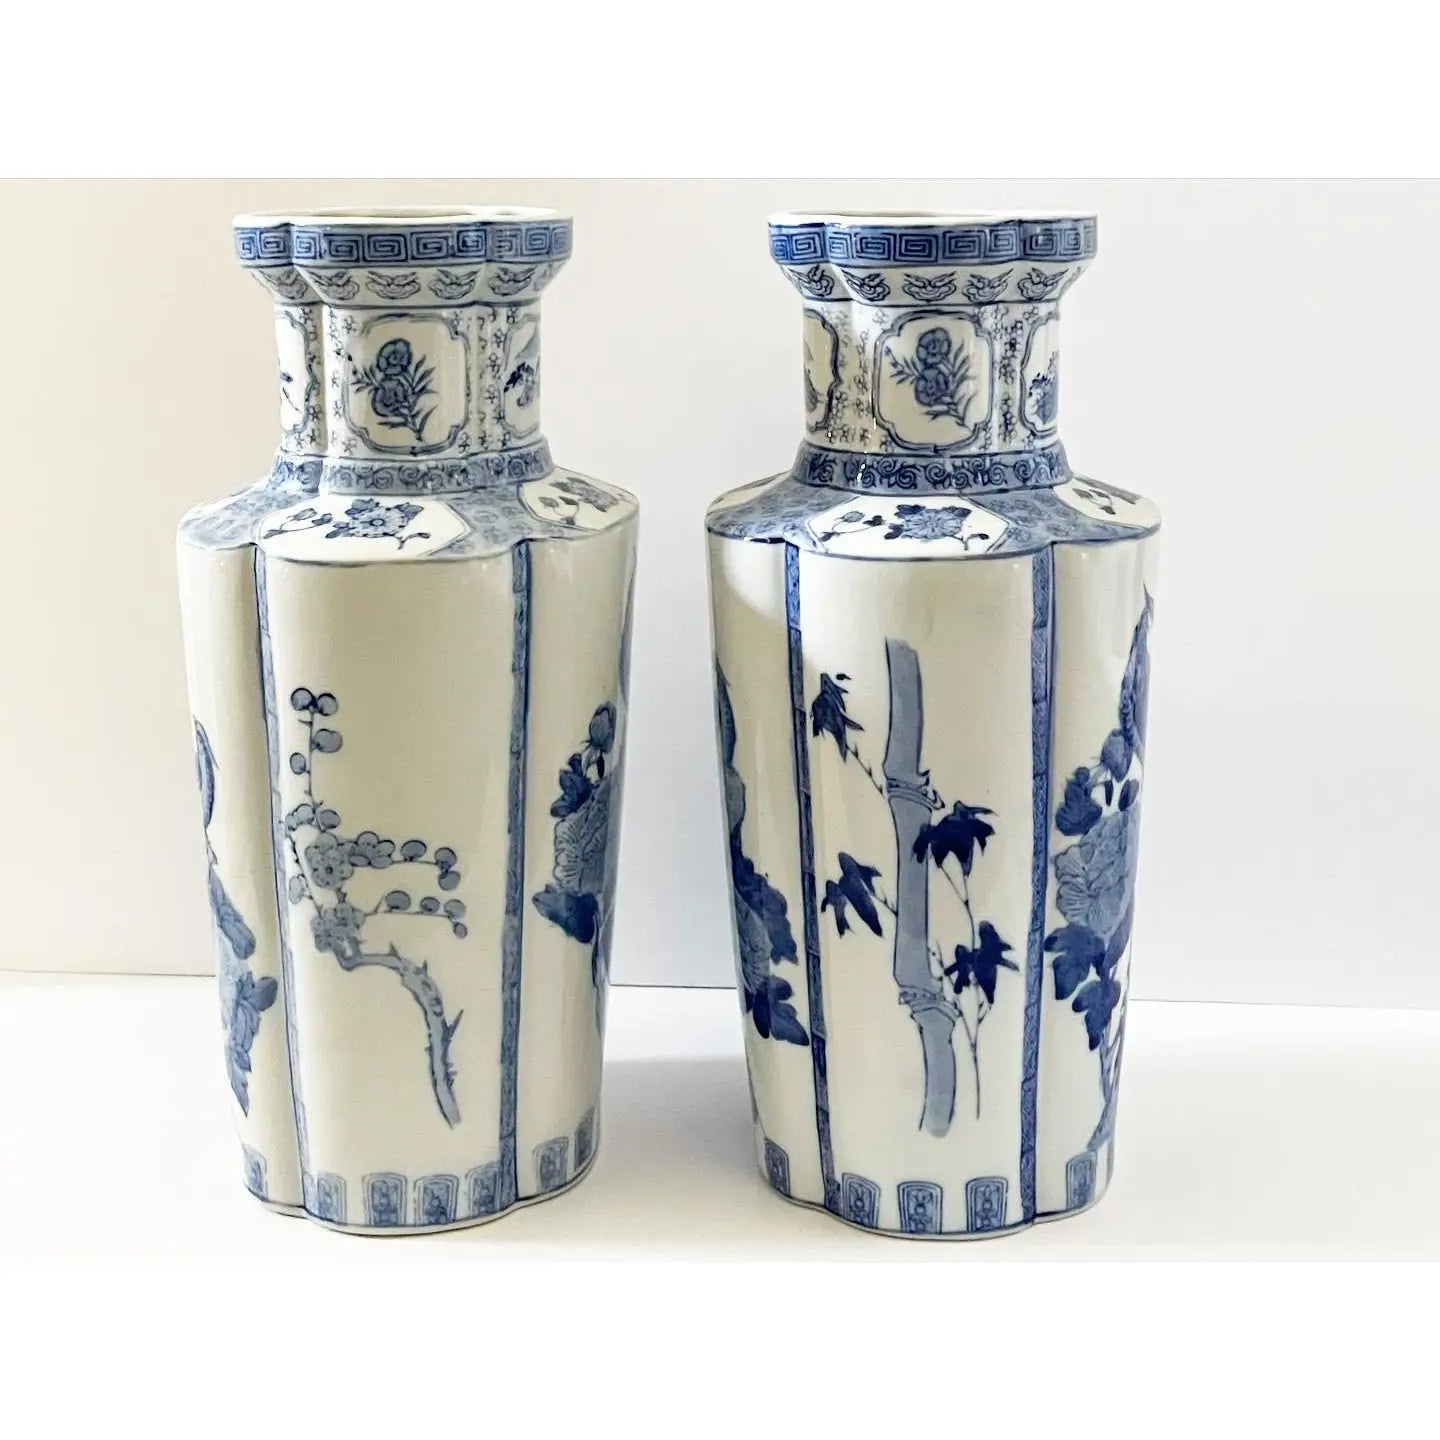 Large Blue and White Chinoiserie Vases With Peacocks - Set of 2